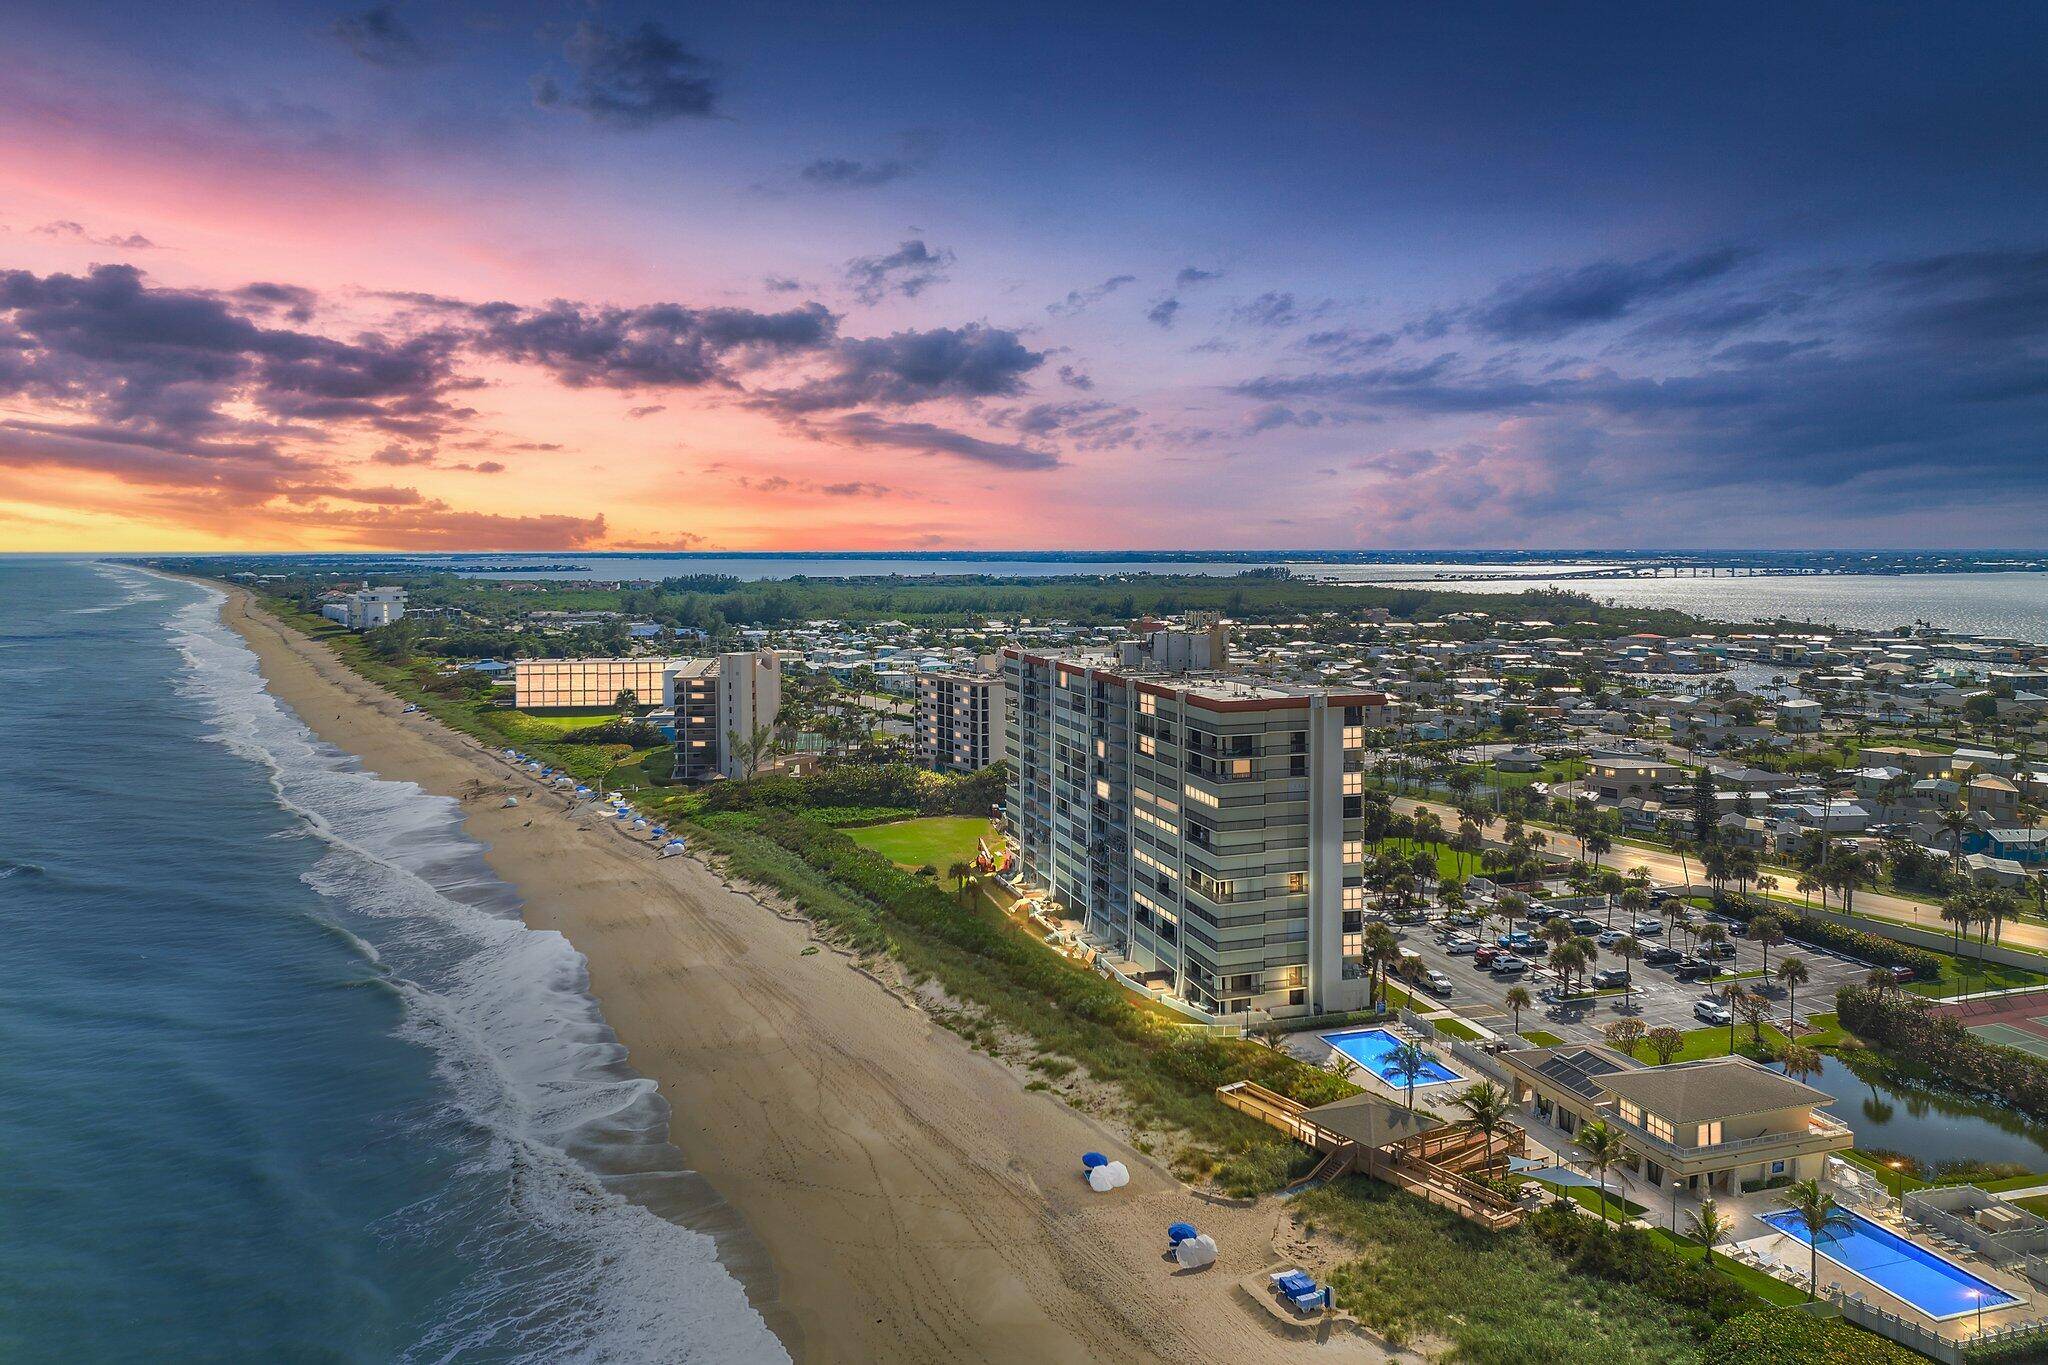 All Assessments Paid in Full Discover unparalleled oceanfront living in this fully furnished, upgraded second floor condo, offering captivating views of the endless horizon.